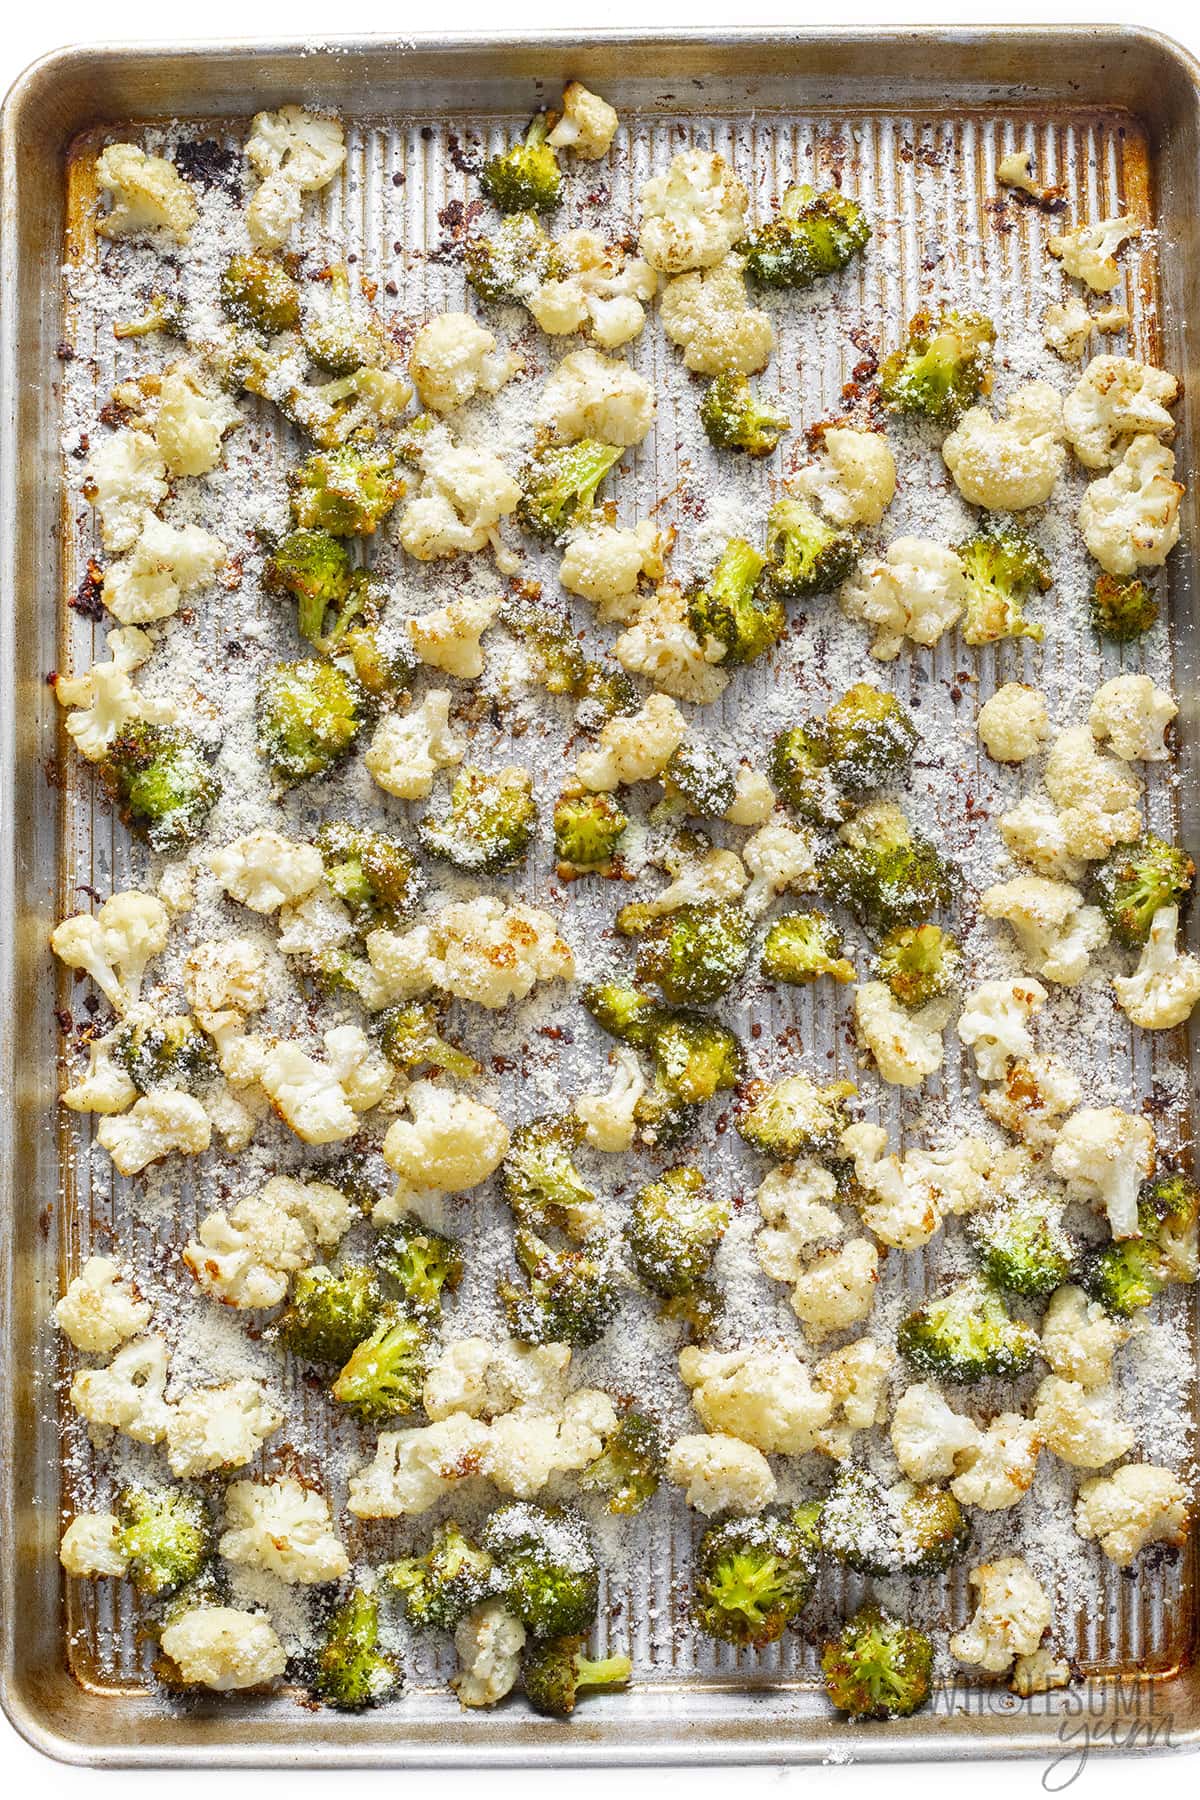 Roasted cauliflower and broccoli with parmesan cheese.